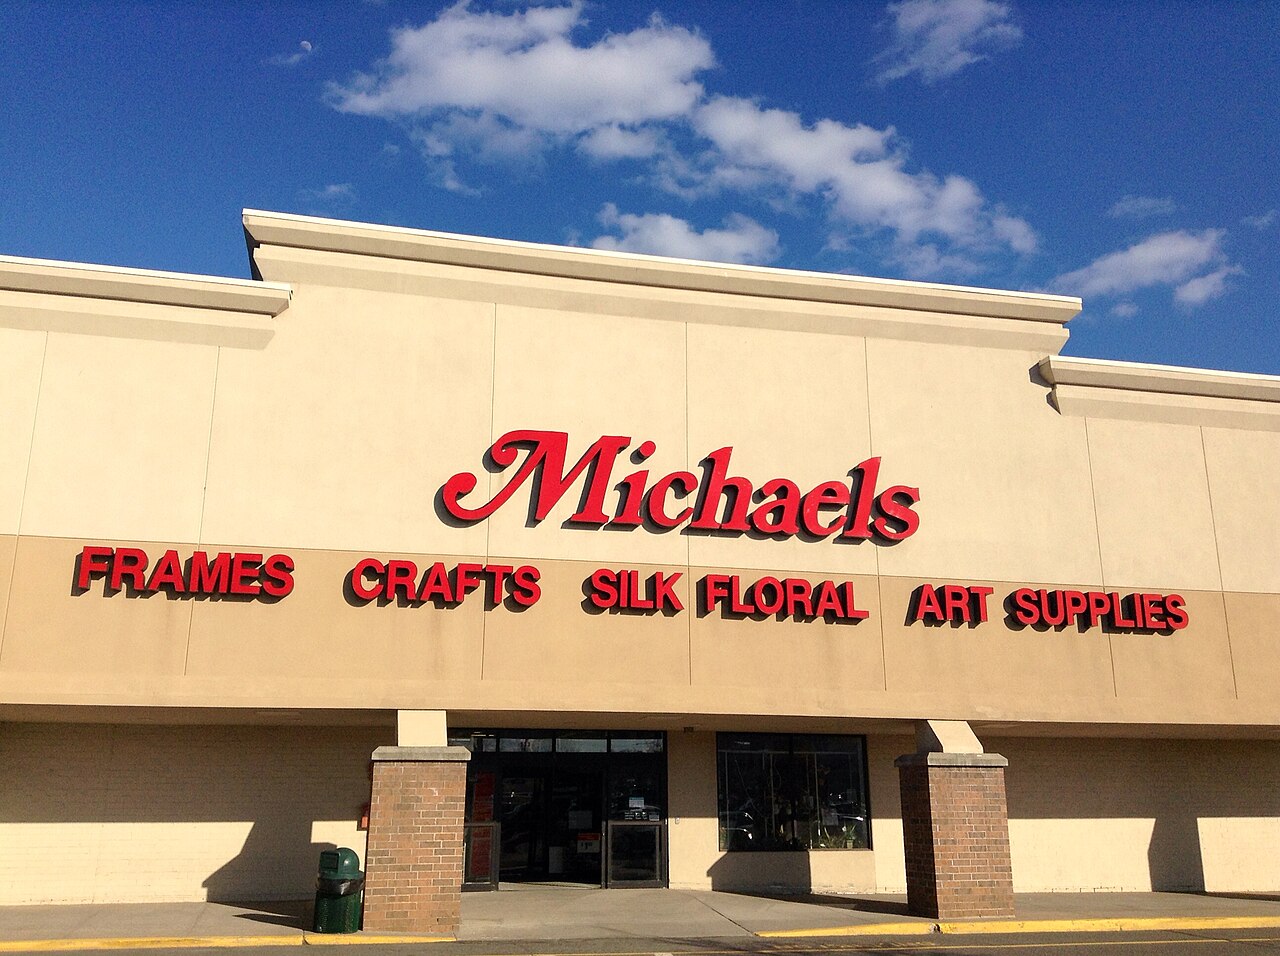 Michaels And Other Arts-And-Craft Stores Need To Get Creative